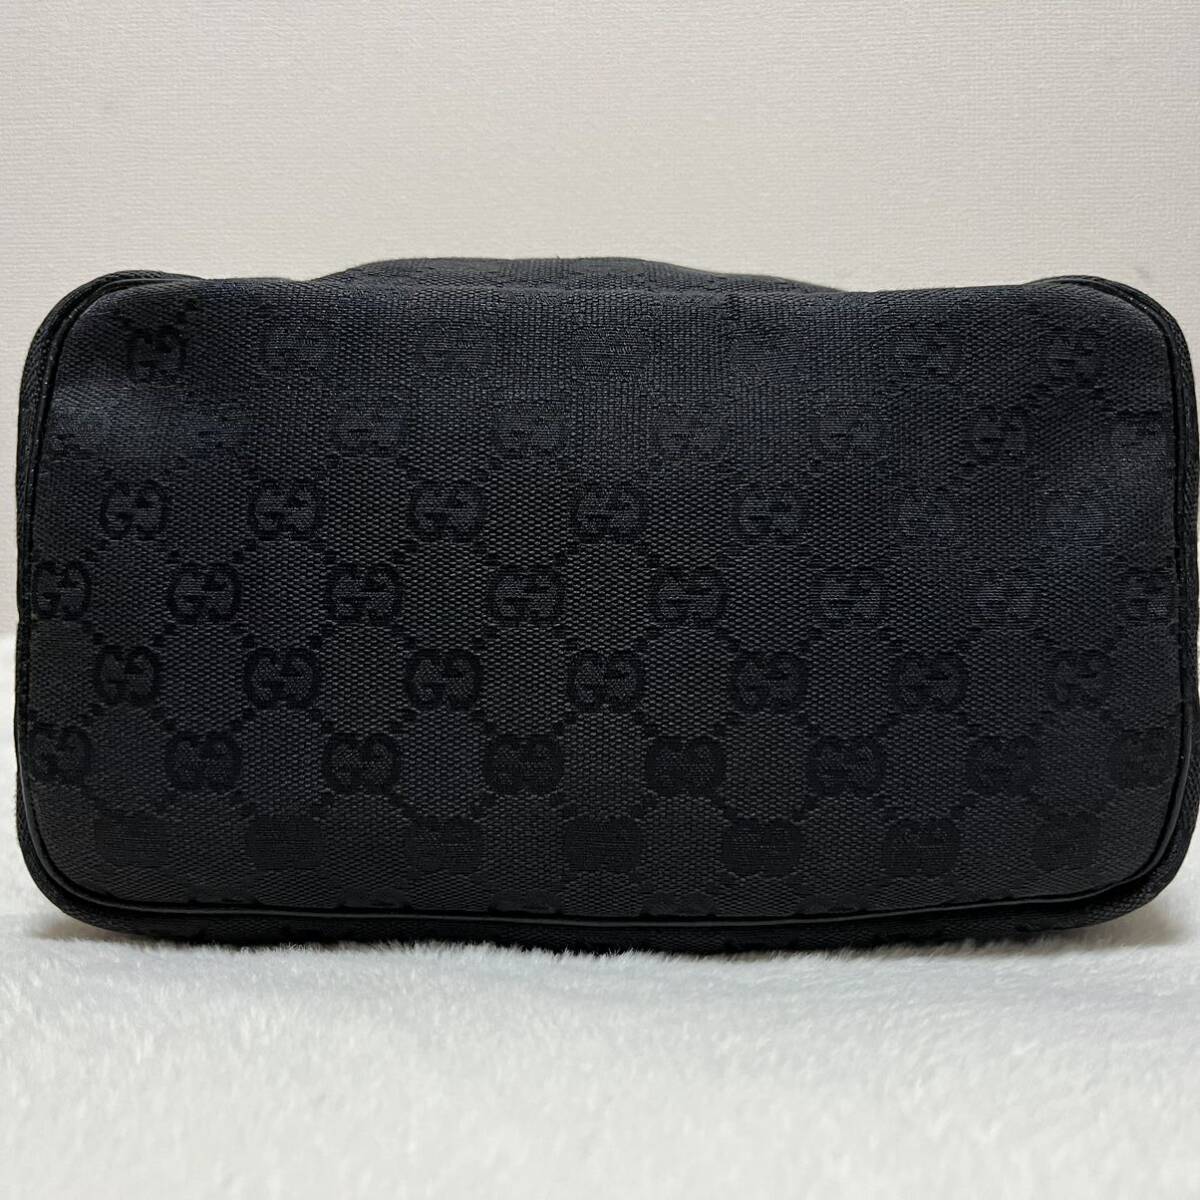 1 jpy unused class # GUCCI Gucci 124540 GG canvas × leather handbag vanity bag pouch black group 